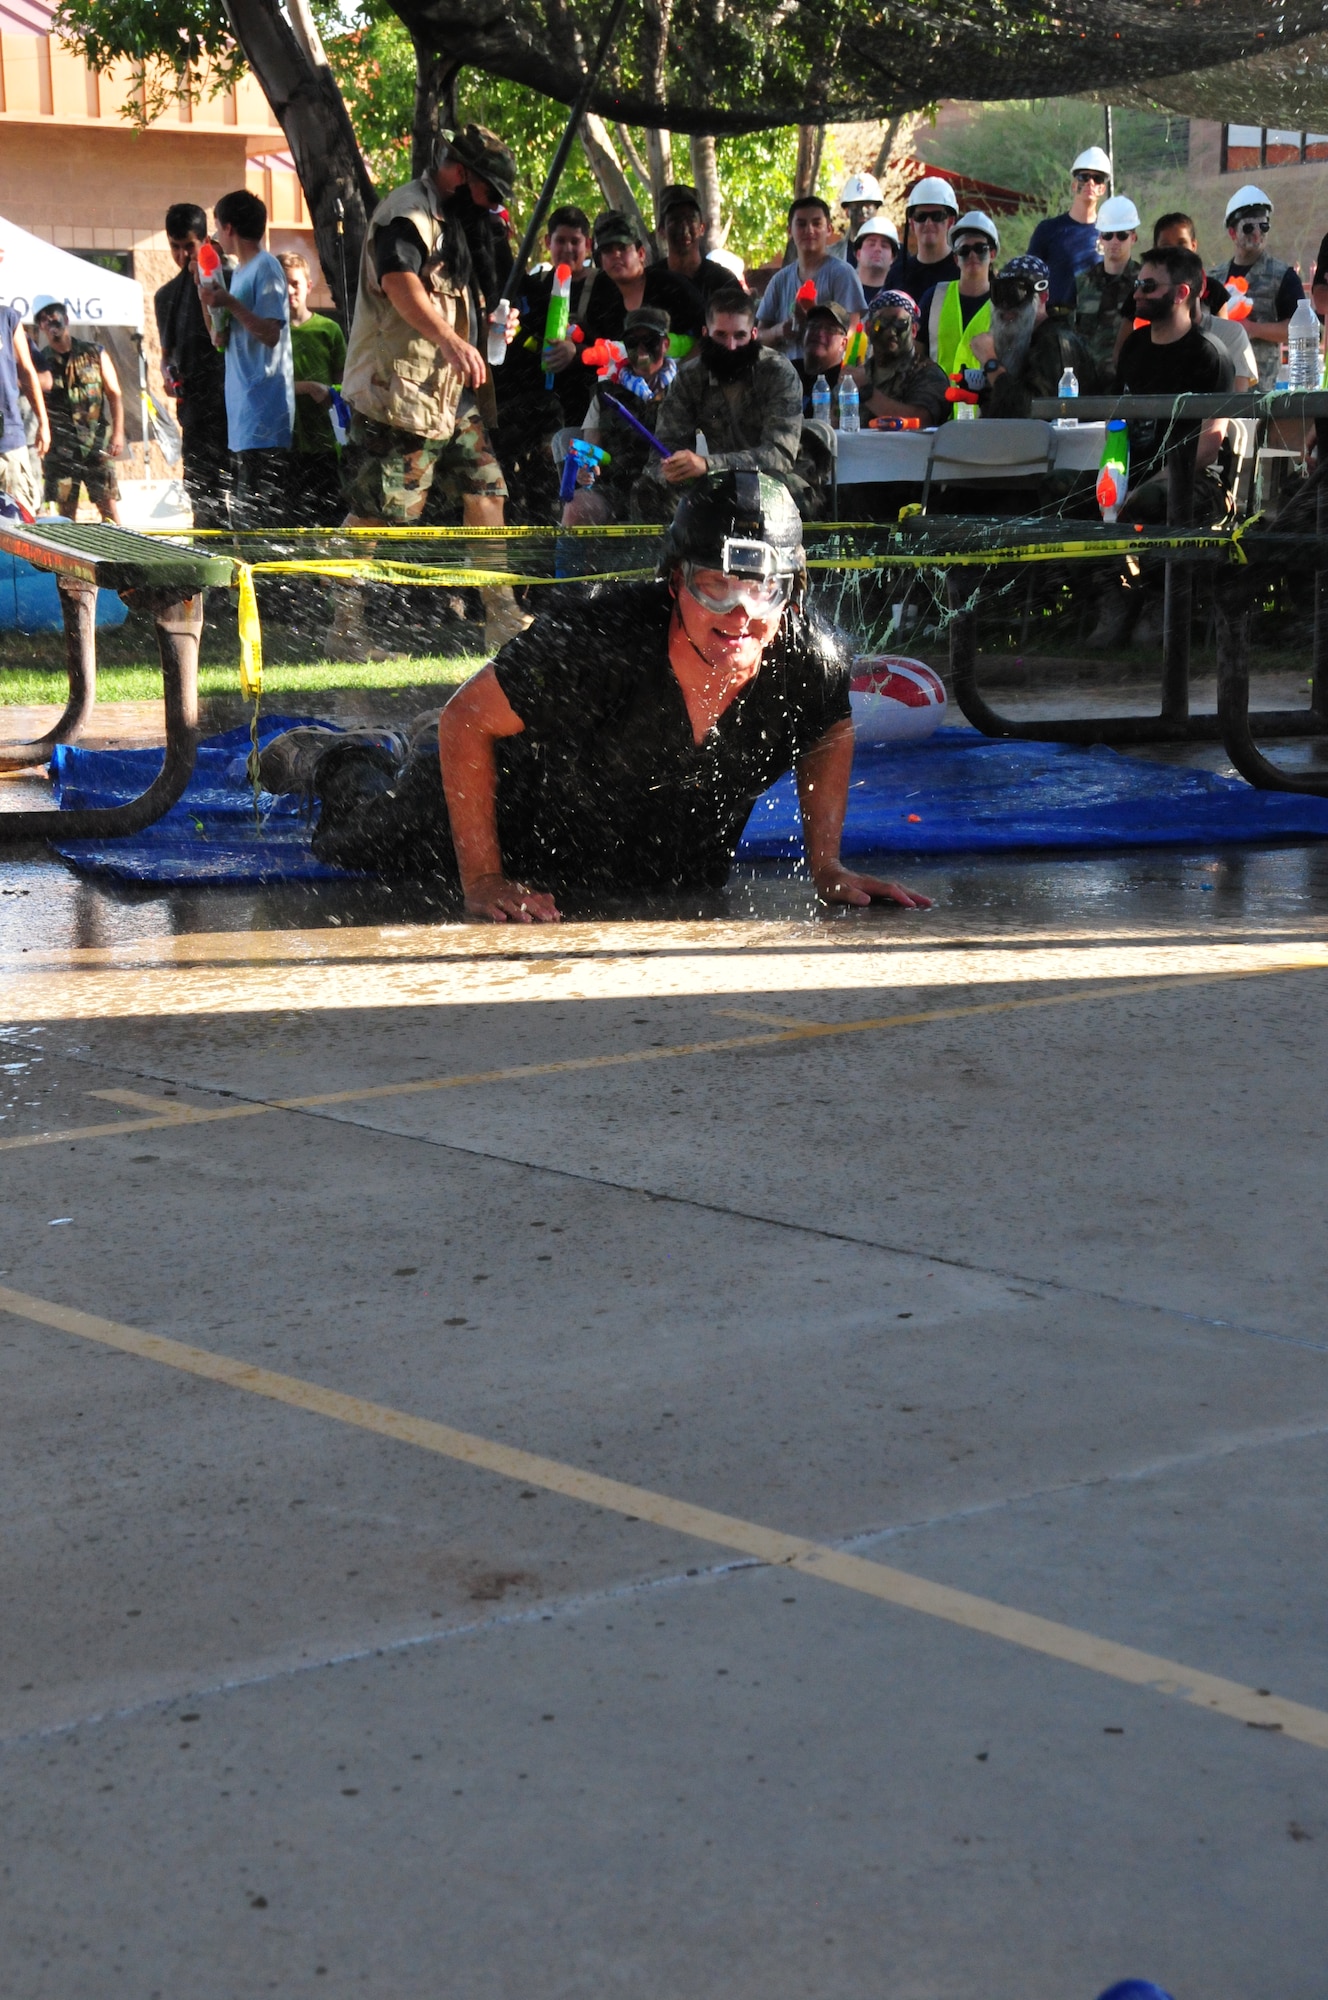 Master Sgt. Don Lewis, 161st Medical Group first sergeant, low crawls through the obstacle course on his way to the grog bowl at the wing’s first-ever combat dining-in, Sept. 12, 2015, at Phoenix Sky Harbor Air National Guard Base. The combat dining in is a time-honored Air Force tradition that is making its way back into units across the Air National Guard. (U.S. Air National Guard photo by Master Sgt. Kelly Deitloff)